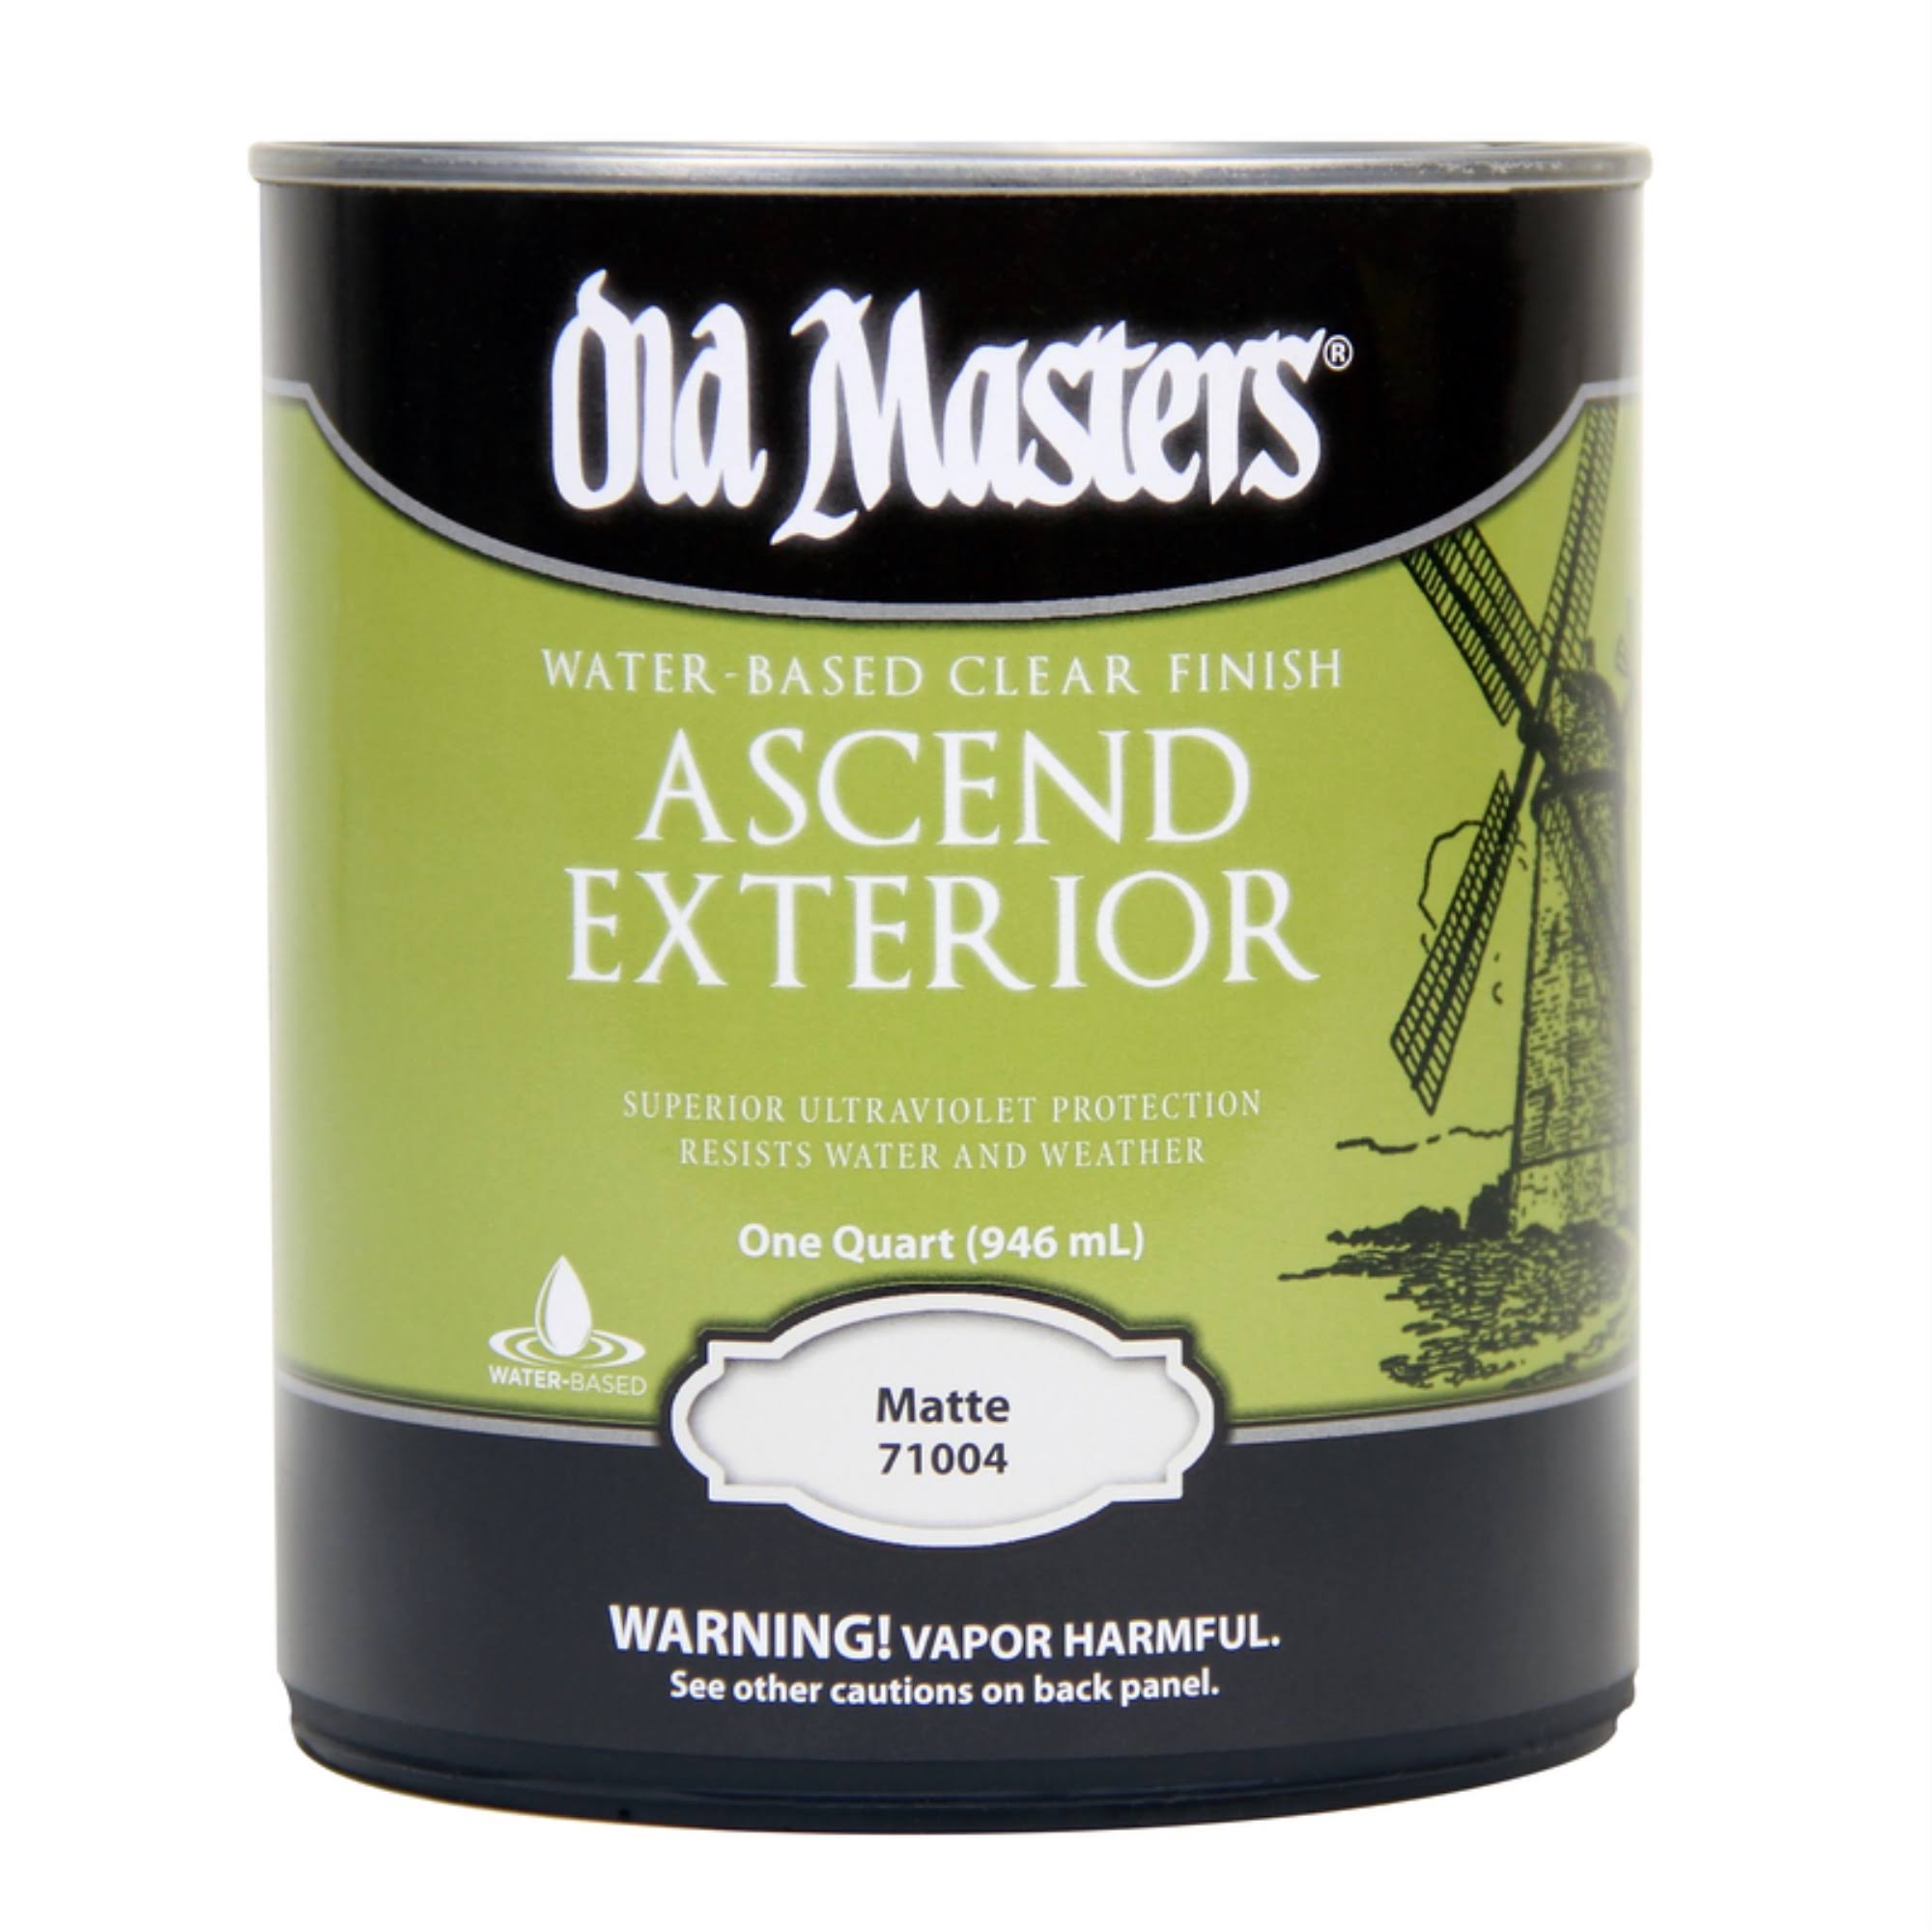 Old Masters 7860273 1 Qt. Ascend Exterior Water-Based Finish - Matte